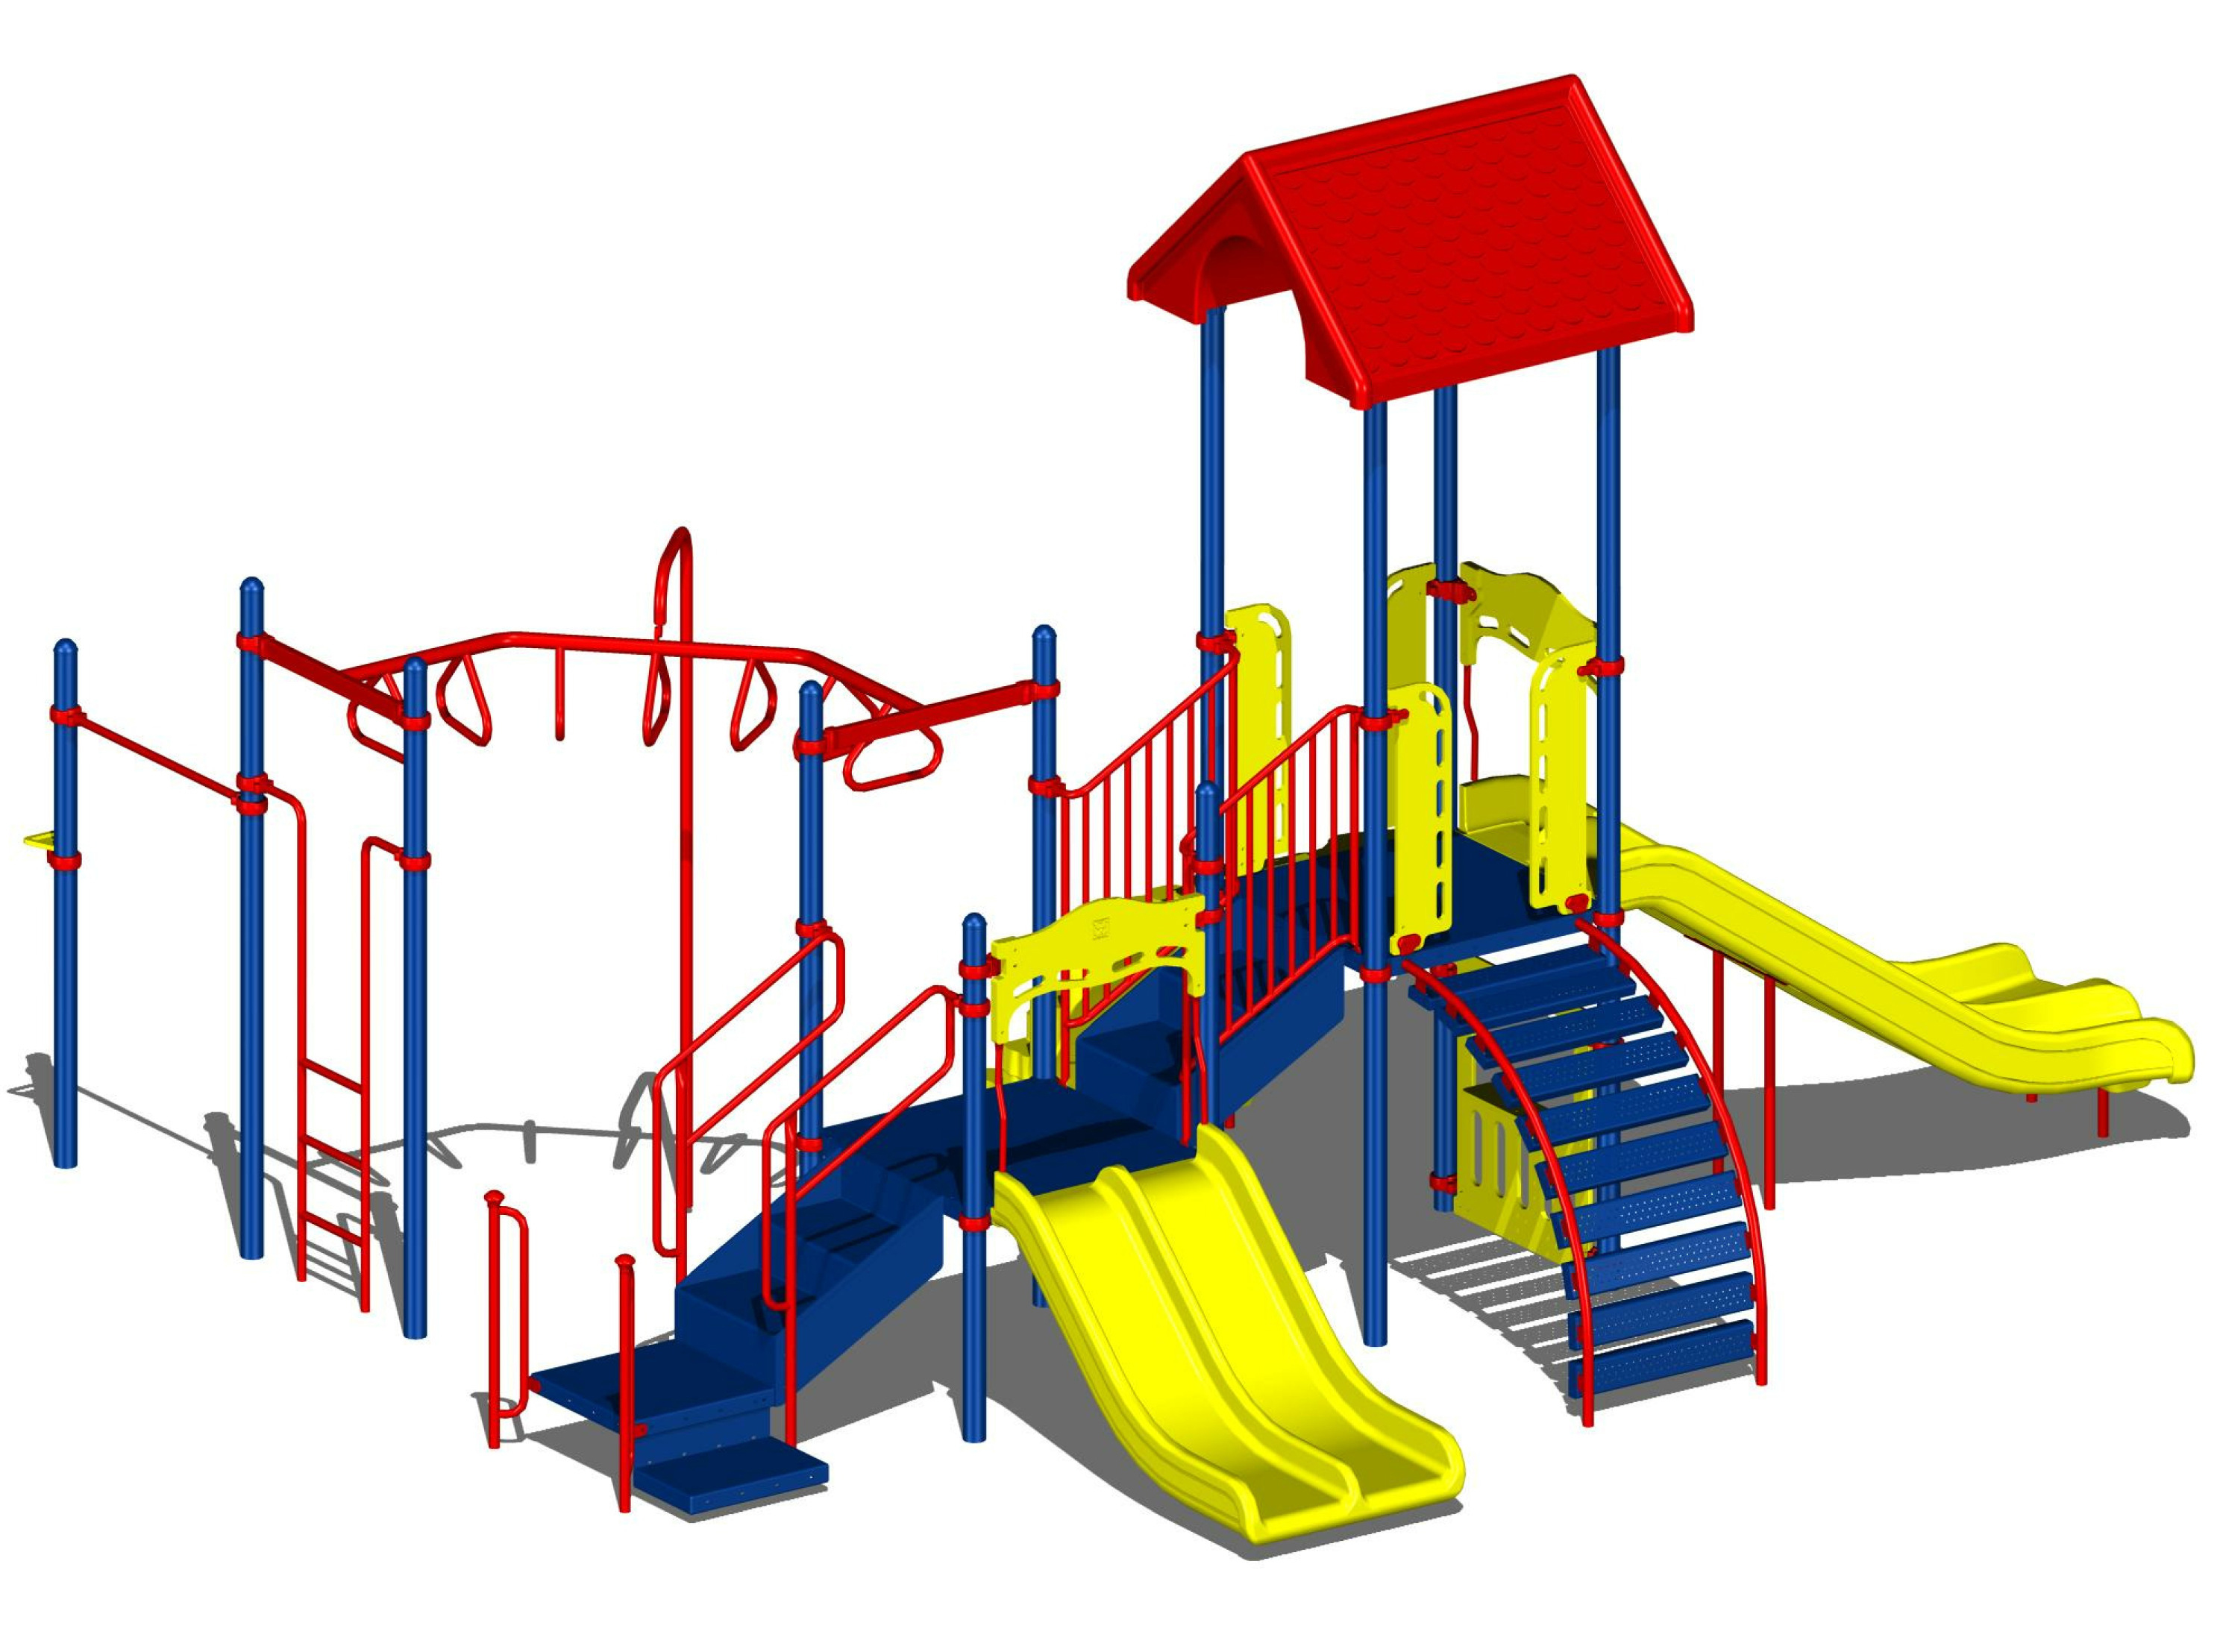 Park clipart playground equipment. Free cliparts download clip